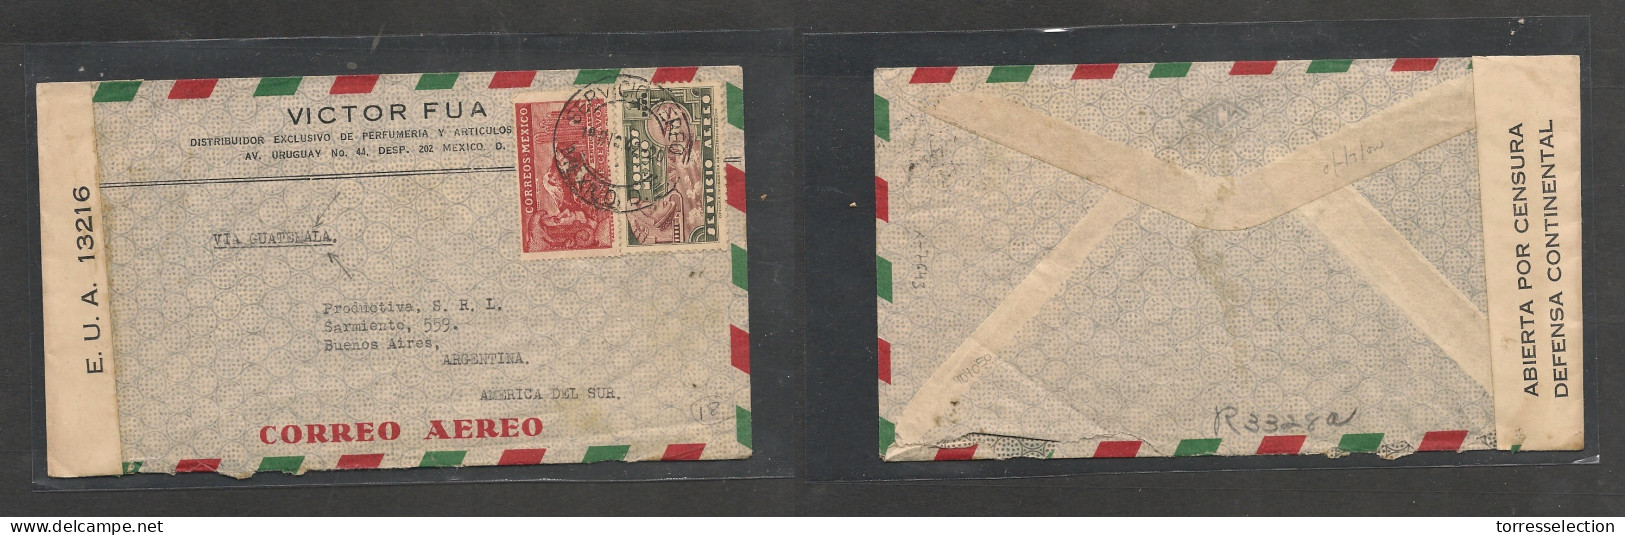 MEXICO. Mexico Cover - 1942 WW2 DF To Argentina Air Censored Mult Fkd Env Via Guatemala Chinese Business, Few Left After - Mexico